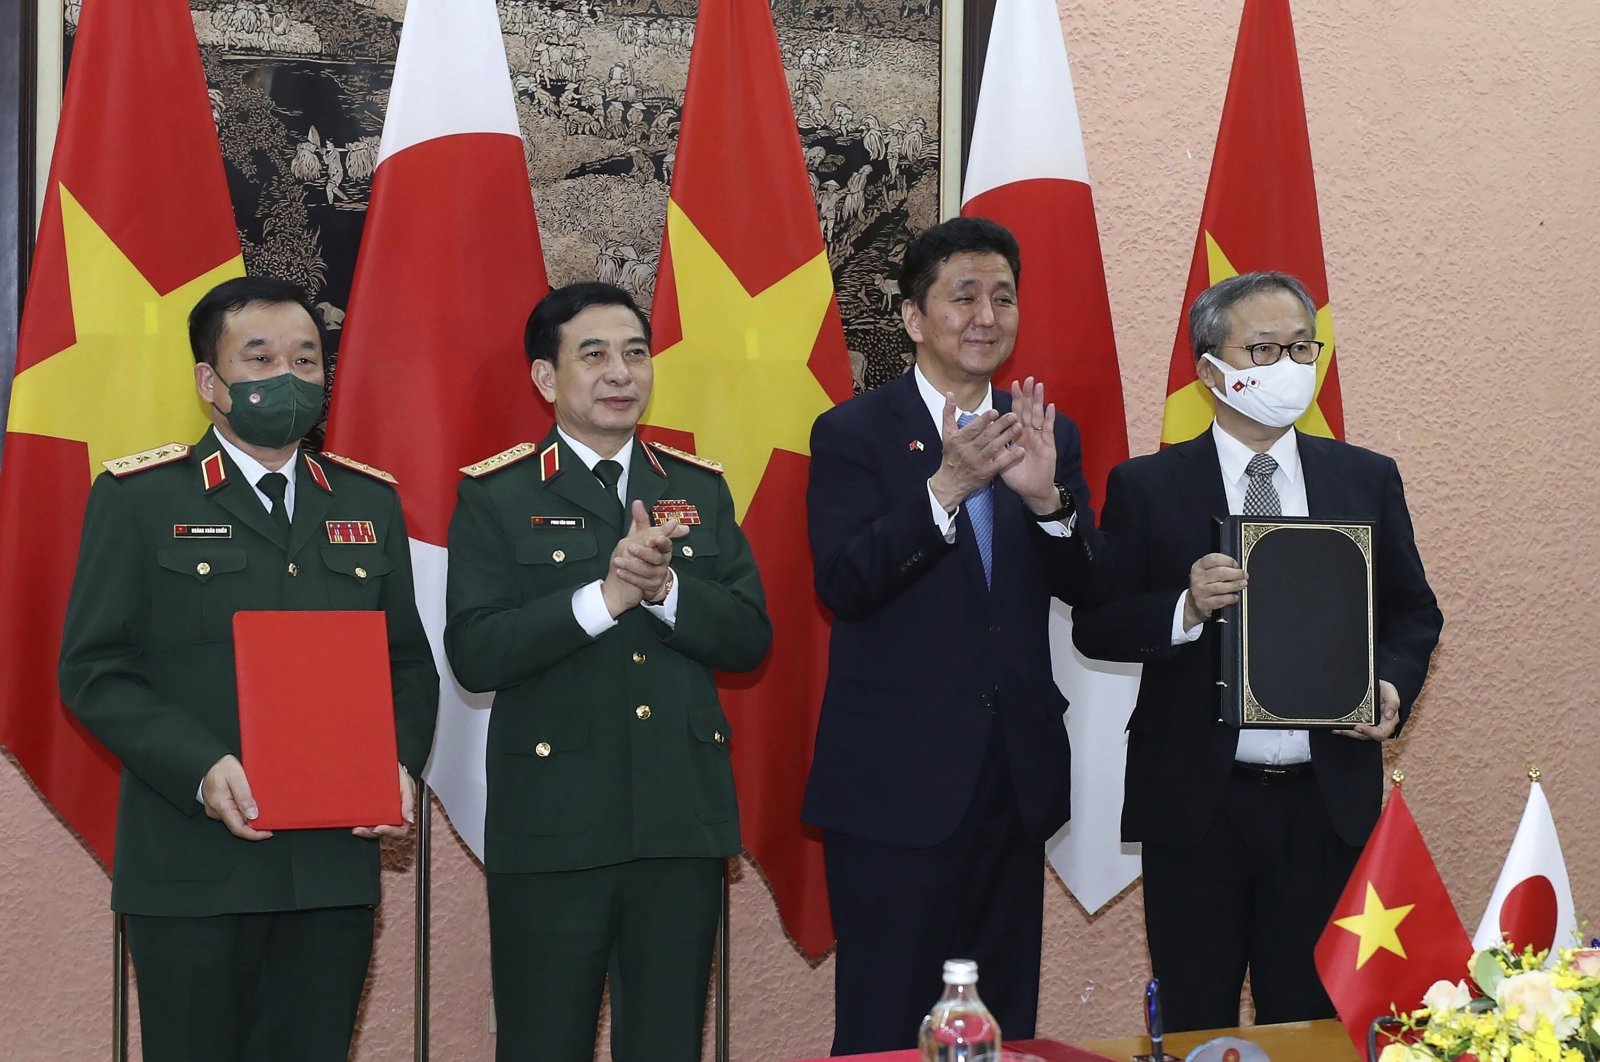 Vietnamese Defense Minister Phan Van Giang, center left, and Japanese Defense Minister Nobuo Kishi, center right, stand for photo with their officials after signing an agreement in Hanoi, Vietnam, Sept. 12, 2021. (AP Photo)